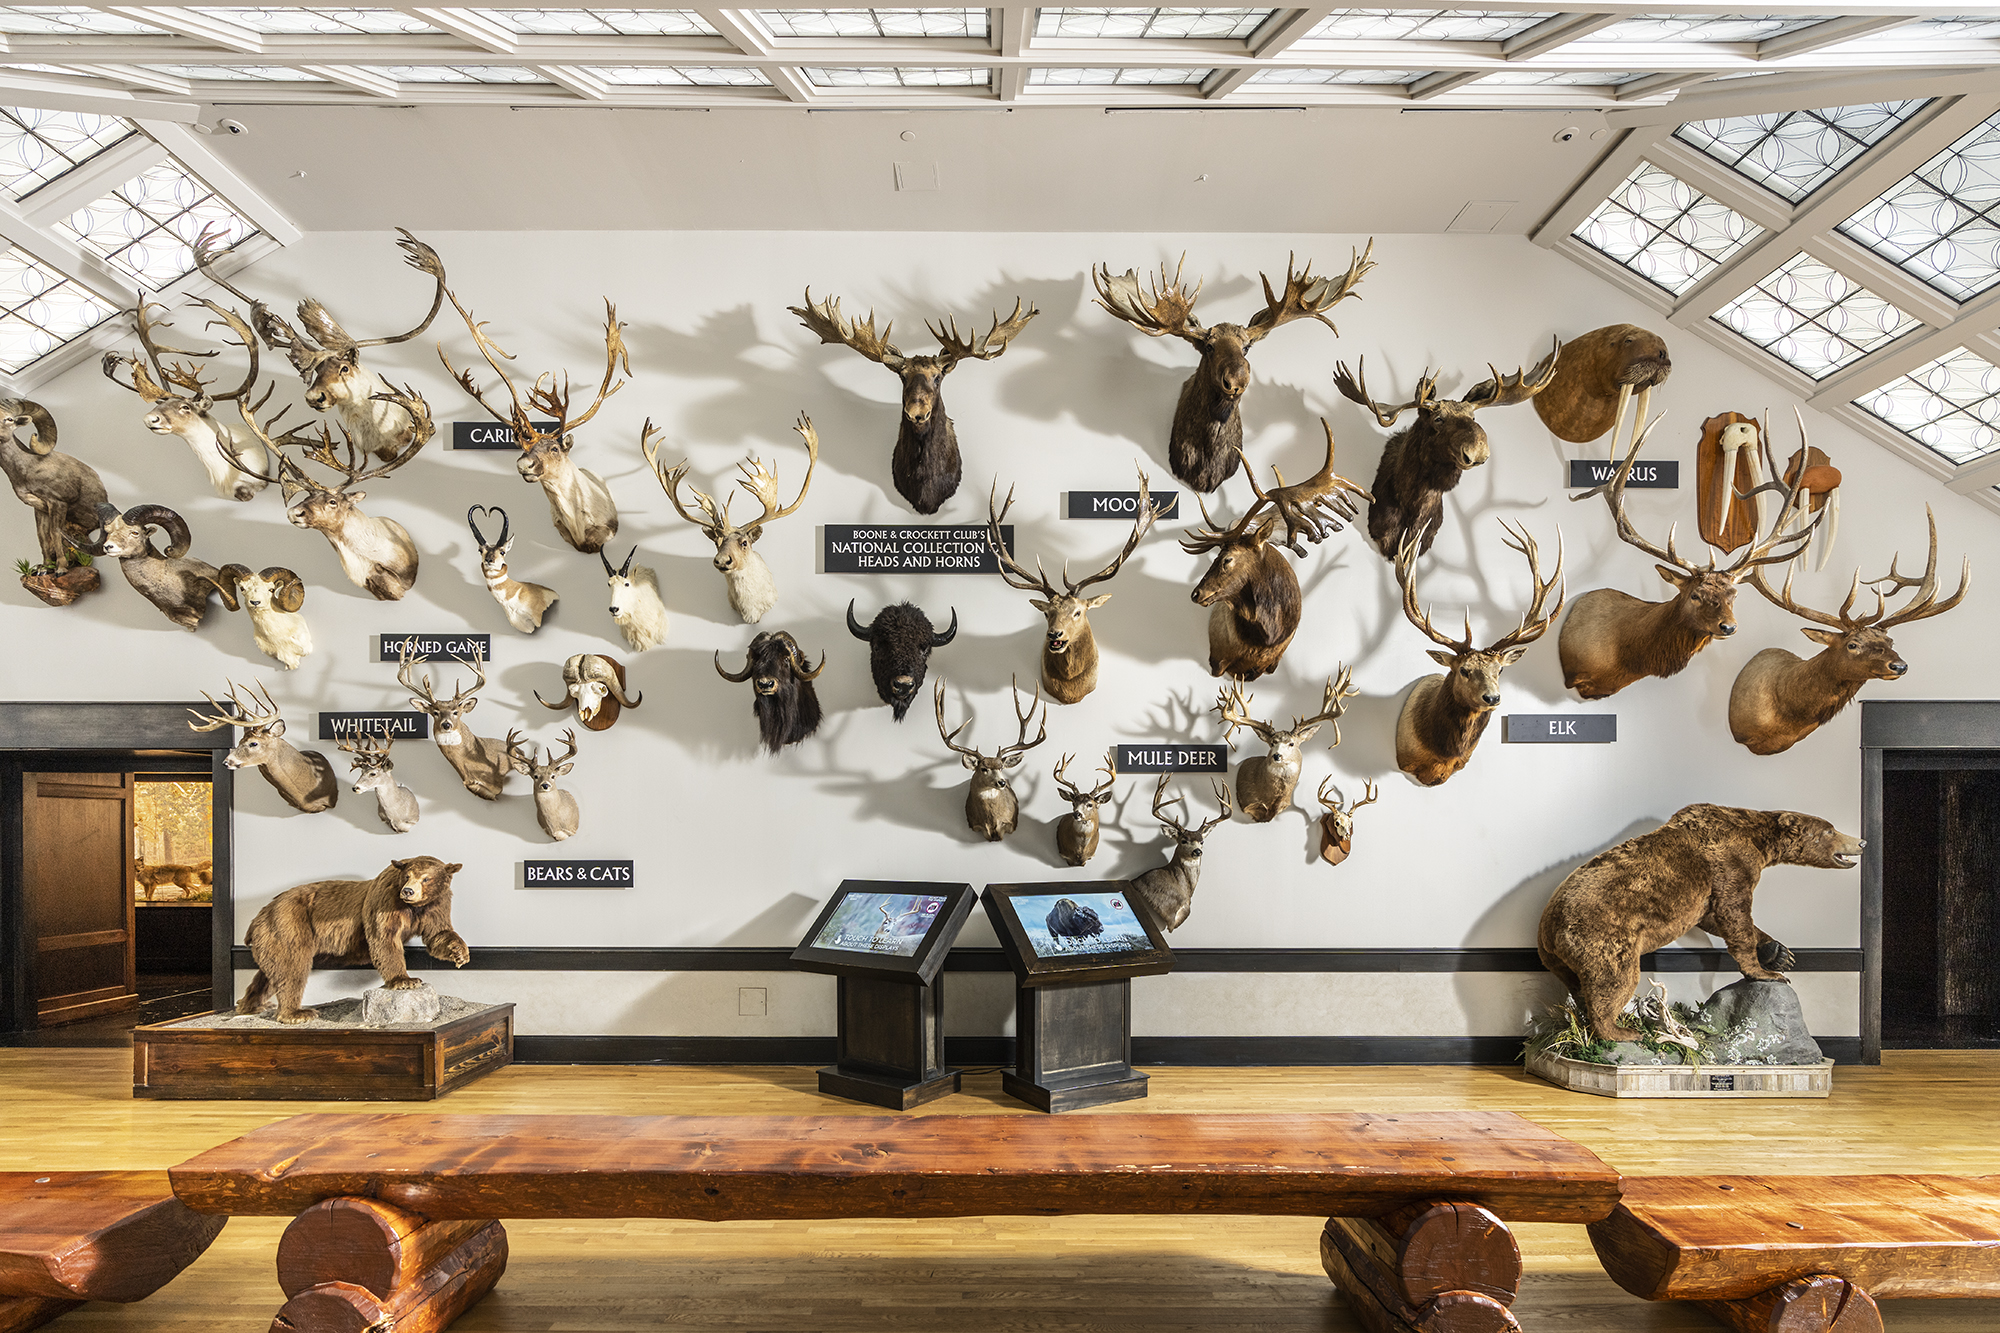 The original Boone and Crockett national collection trophy mounts are now housed in Springfield, Missouri.